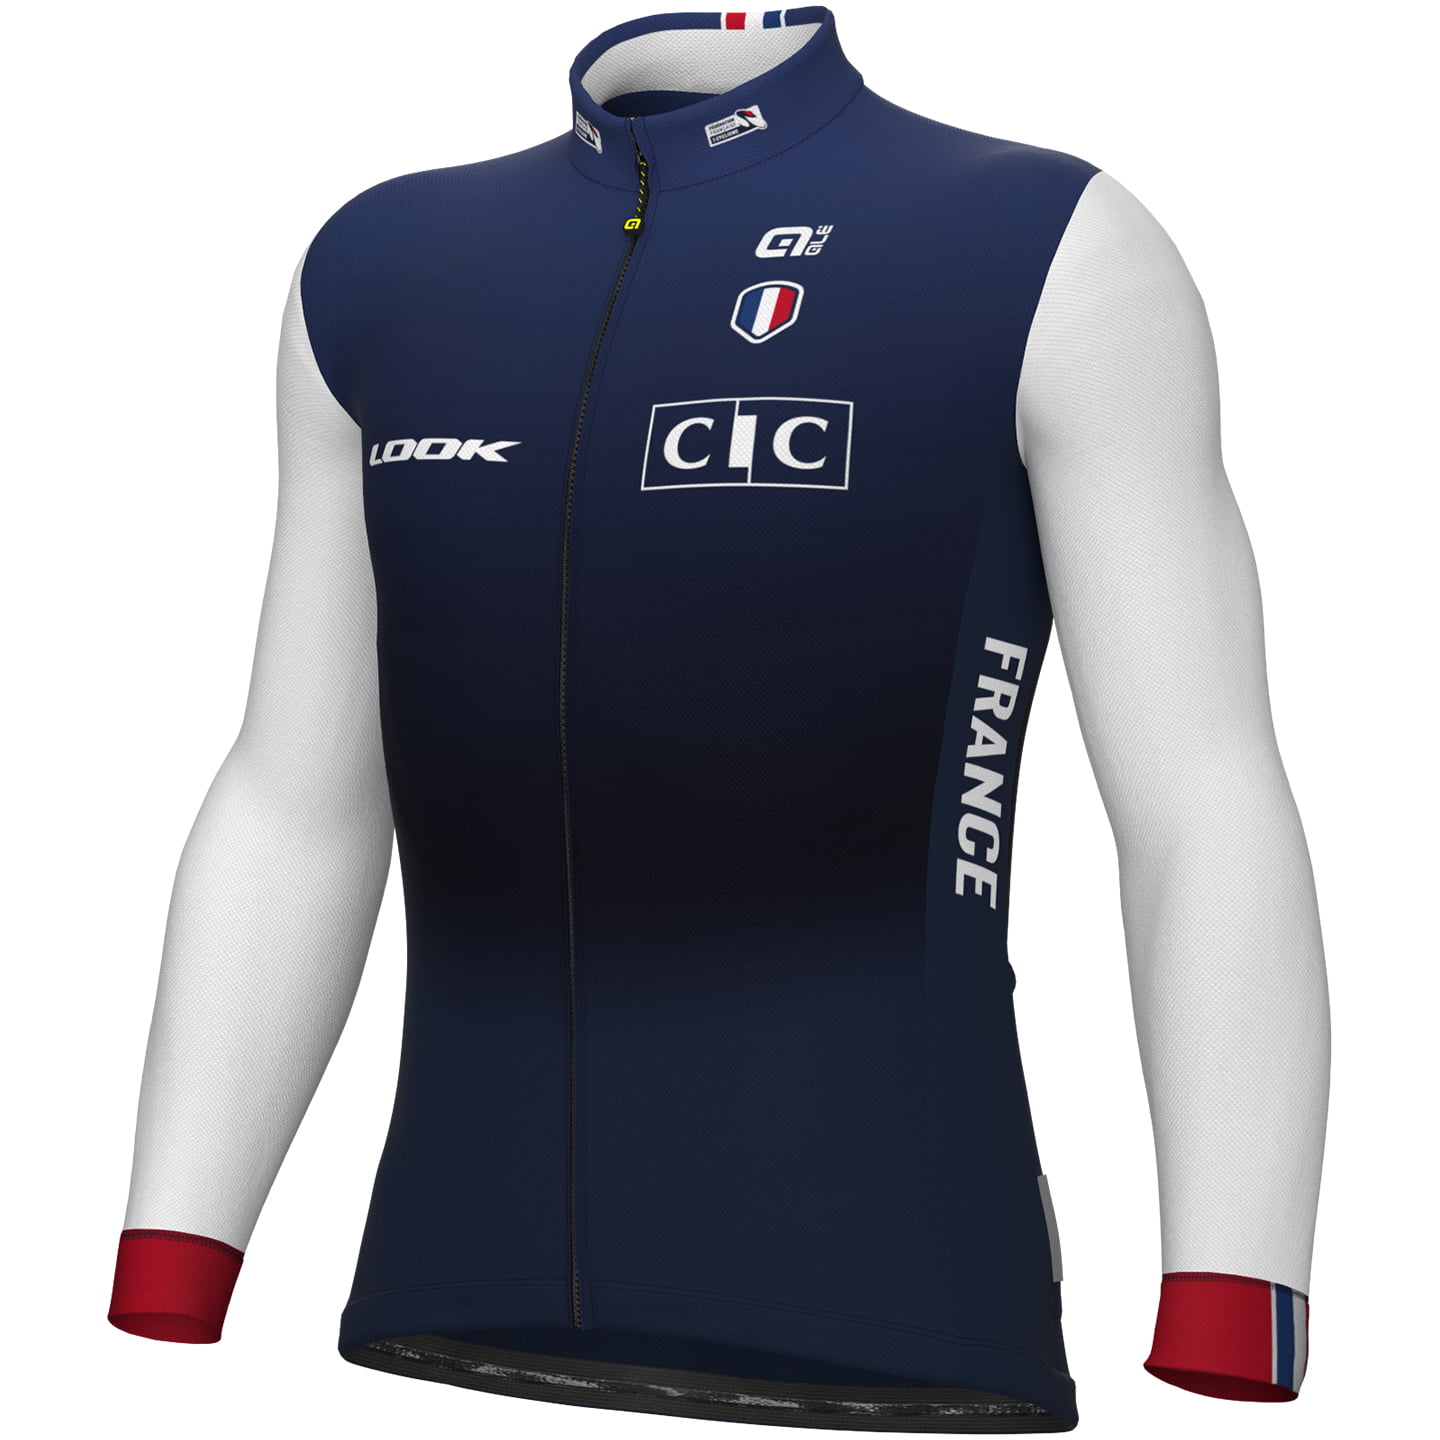 FRENCH NATIONAL TEAM 2023 Long Sleeve Jersey, for men, size L, Cycling shirt, Cycle clothing